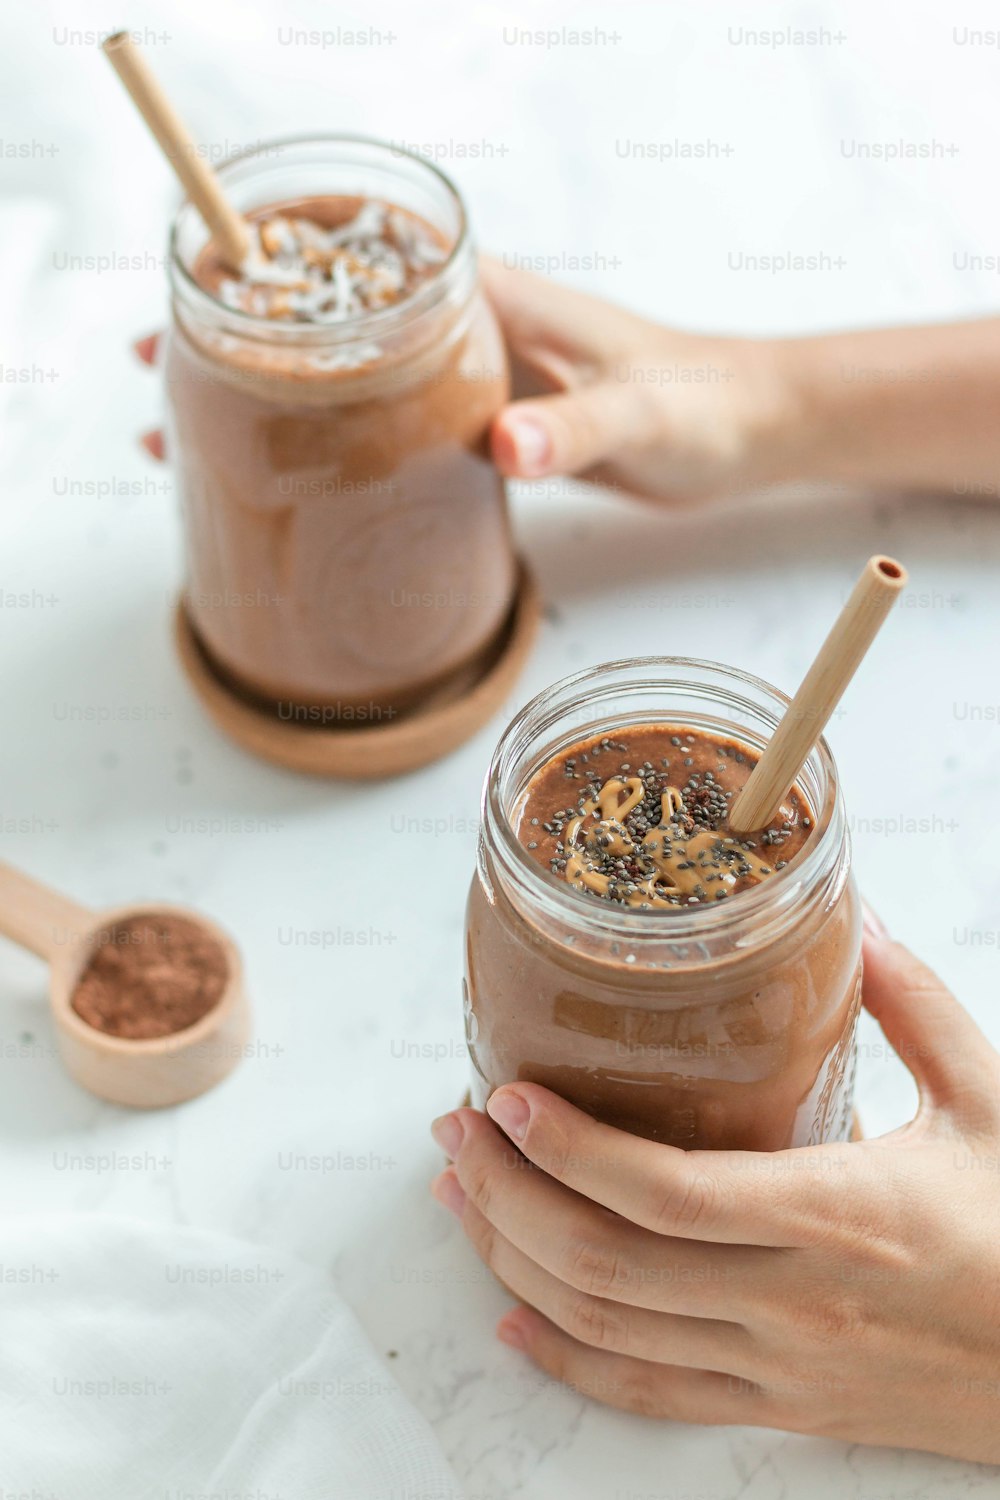 a person holding a jar of chocolate smoothie